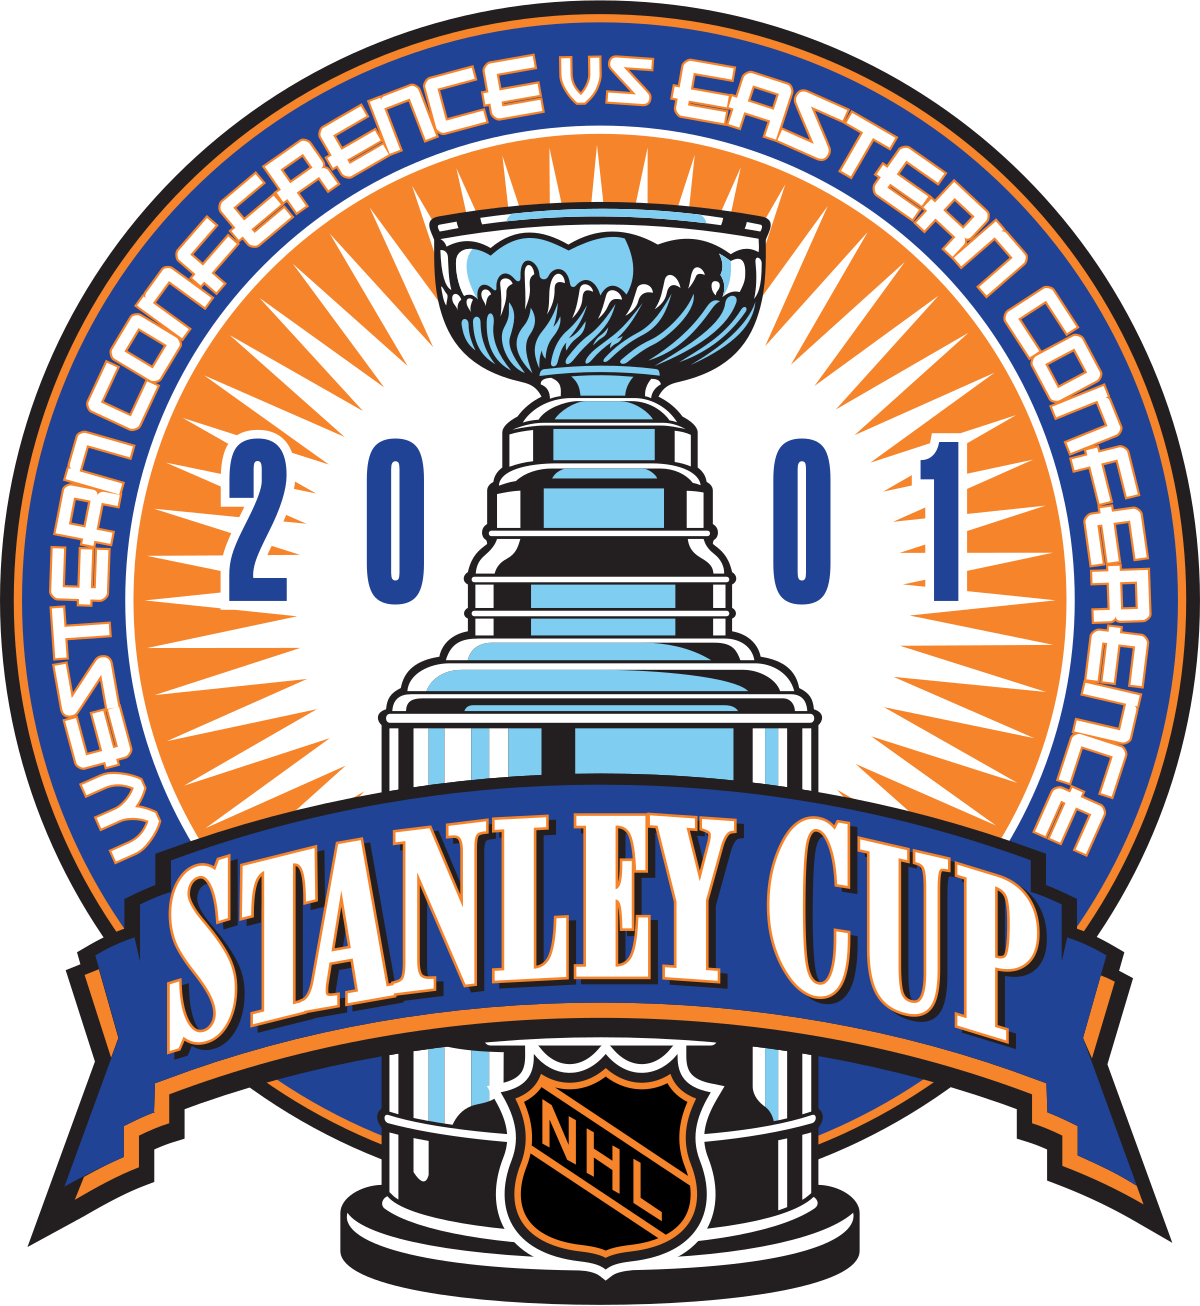 File:HHF 11 - Stanley Cup (13829547624).jpg - Wikimedia Commons